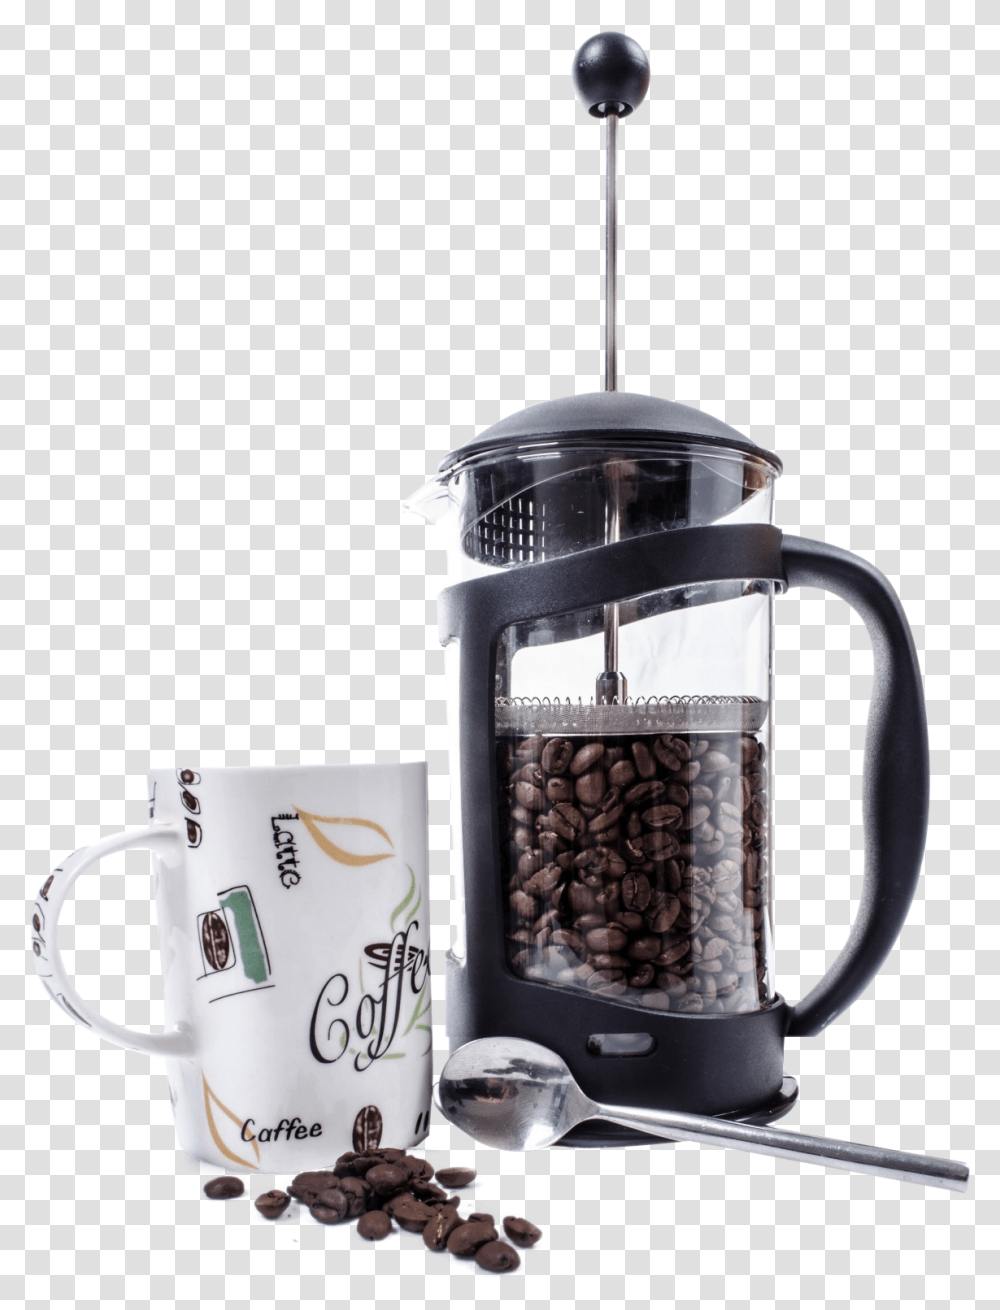 Coffee Grinder And Coffee Cup Image Coffee Grinder, Pottery, Jug, Mixer, Appliance Transparent Png